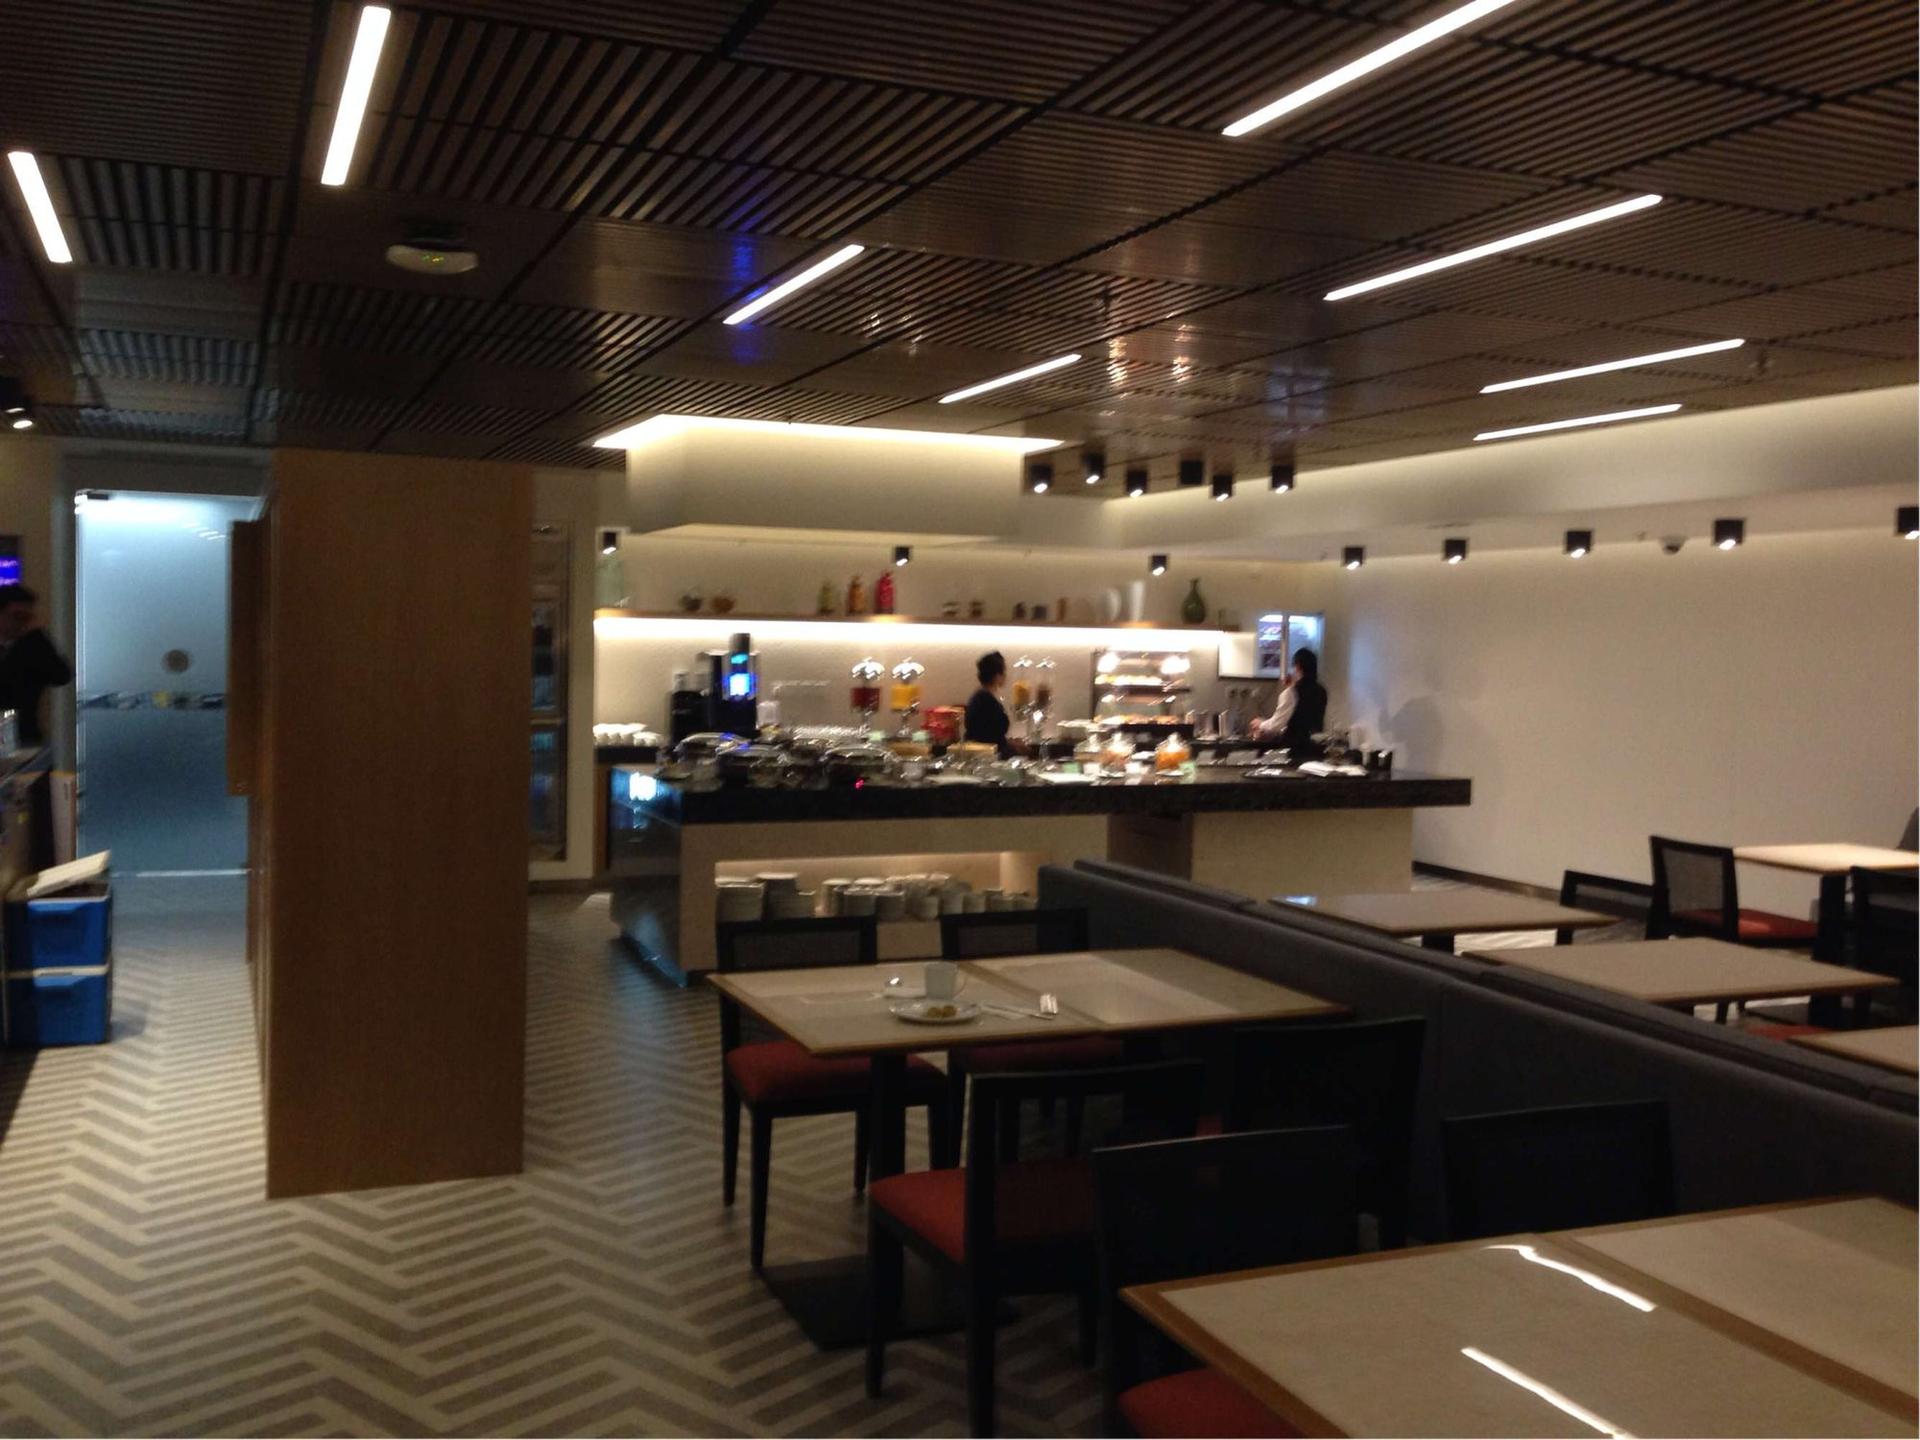 Singapore Airlines SilverKris Business Class Lounge image 32 of 68